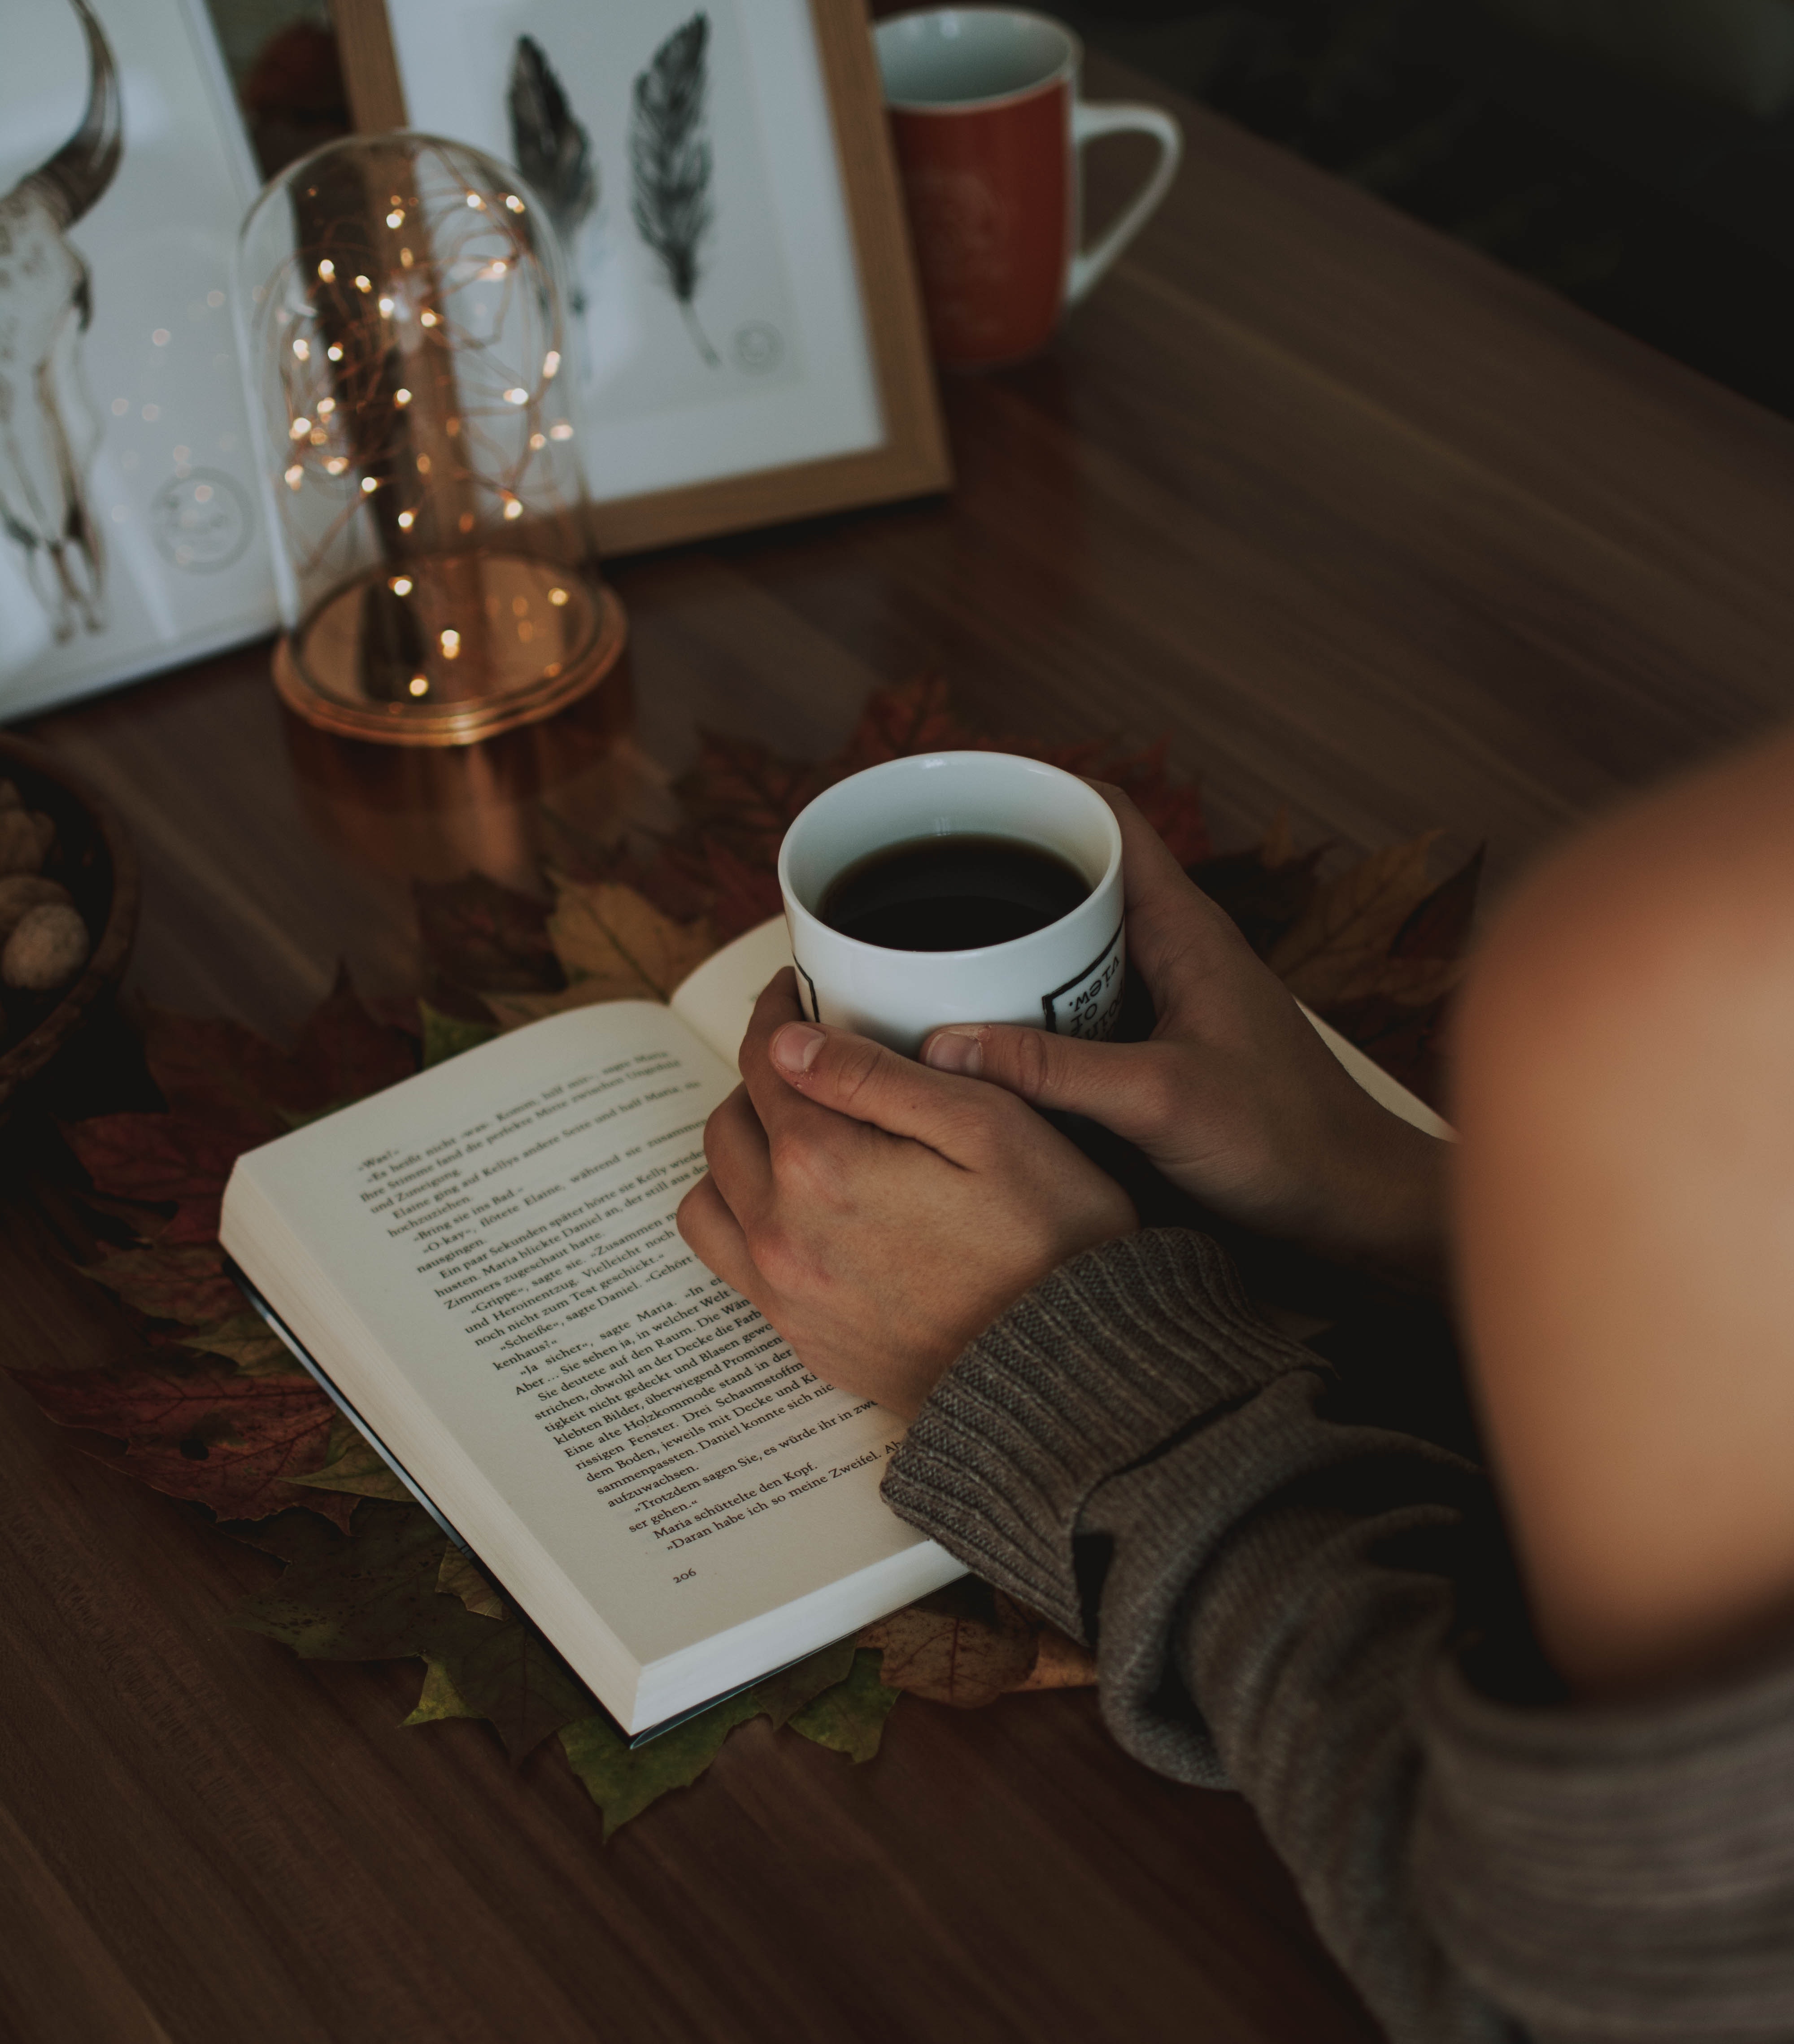 A girl holding a mug of coffee above an opened book on a wooden table